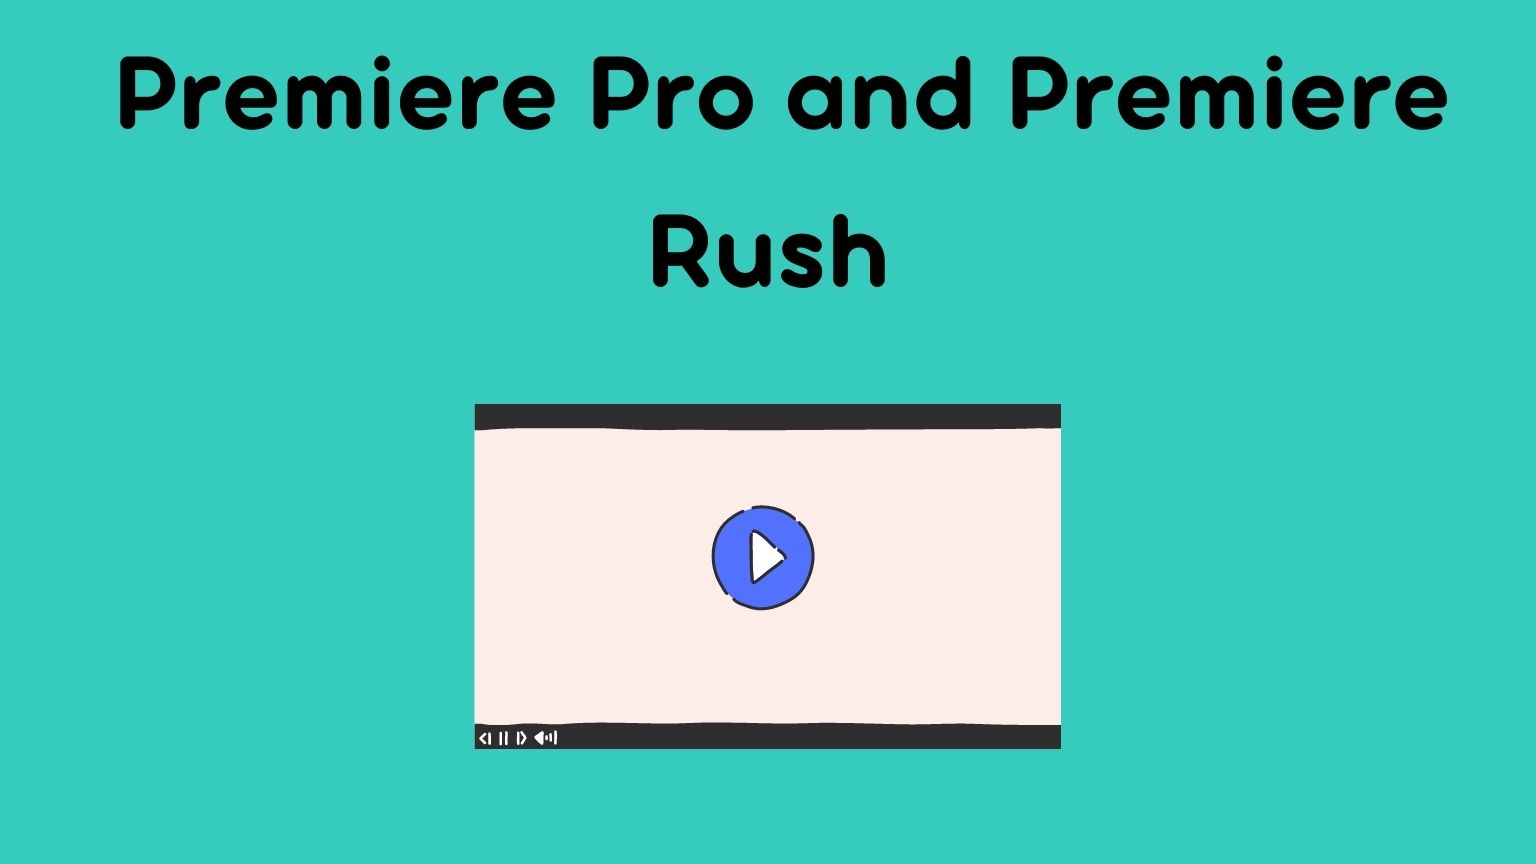 whats the difference between premiere pro and premiere rush